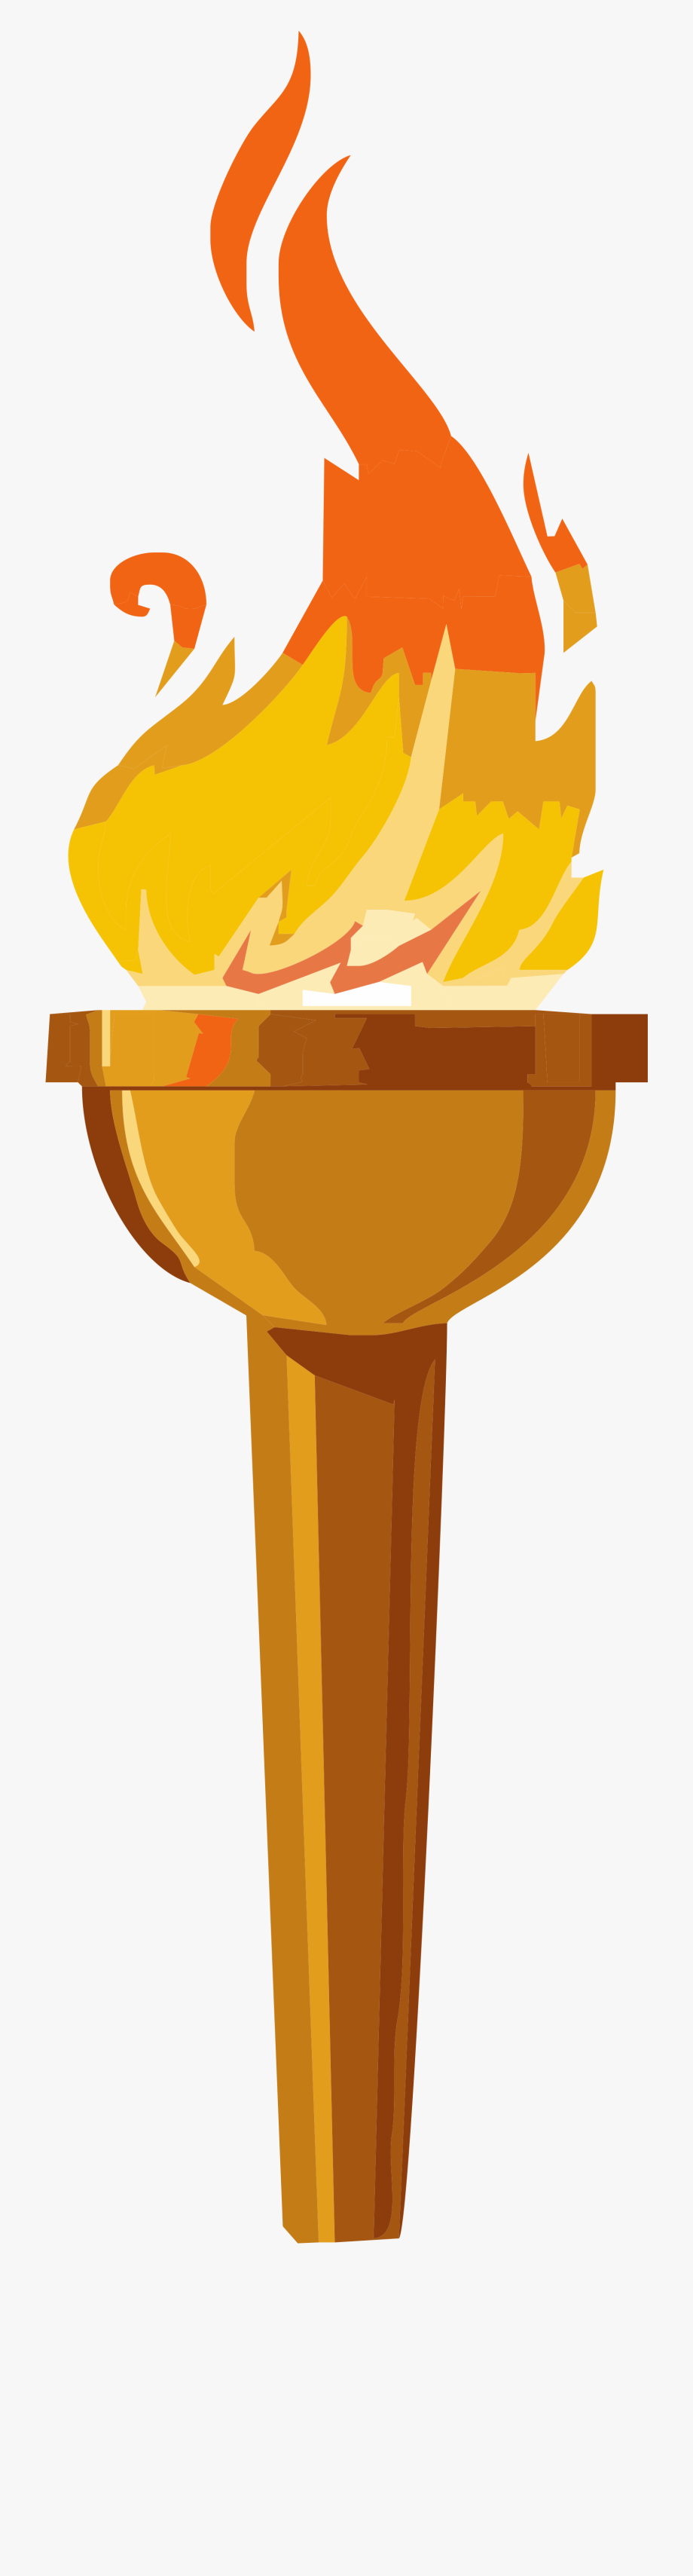 olympics clipart torch book